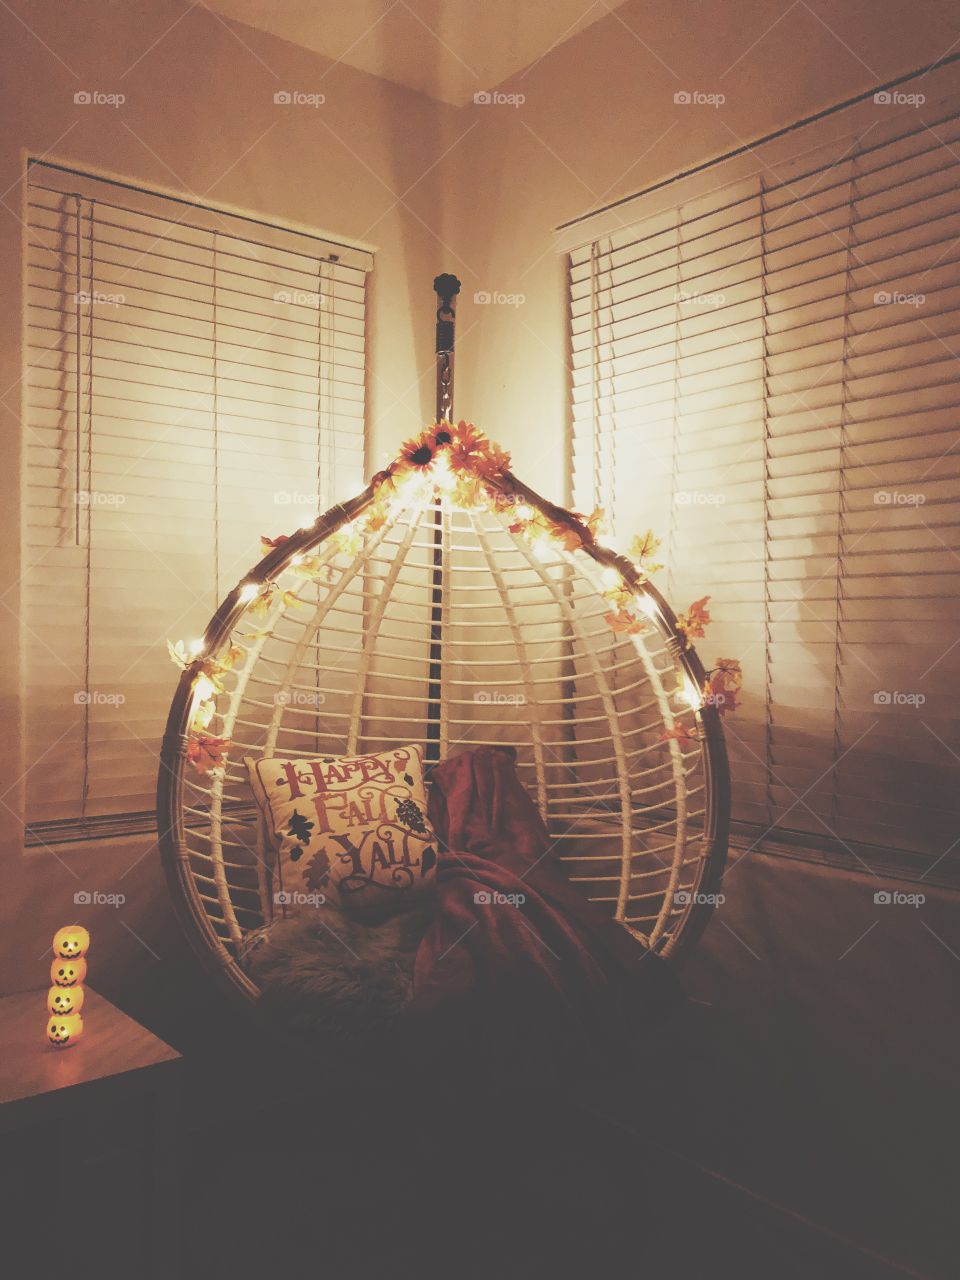 I decorated my swing basket for fall and I love how it turns out and how cozy this looks. The swing basket might be pricey but it’s all worth it! but all the accessories are budget friendly from dollar tree and ross. Happy Fall Y’all🍁🎃